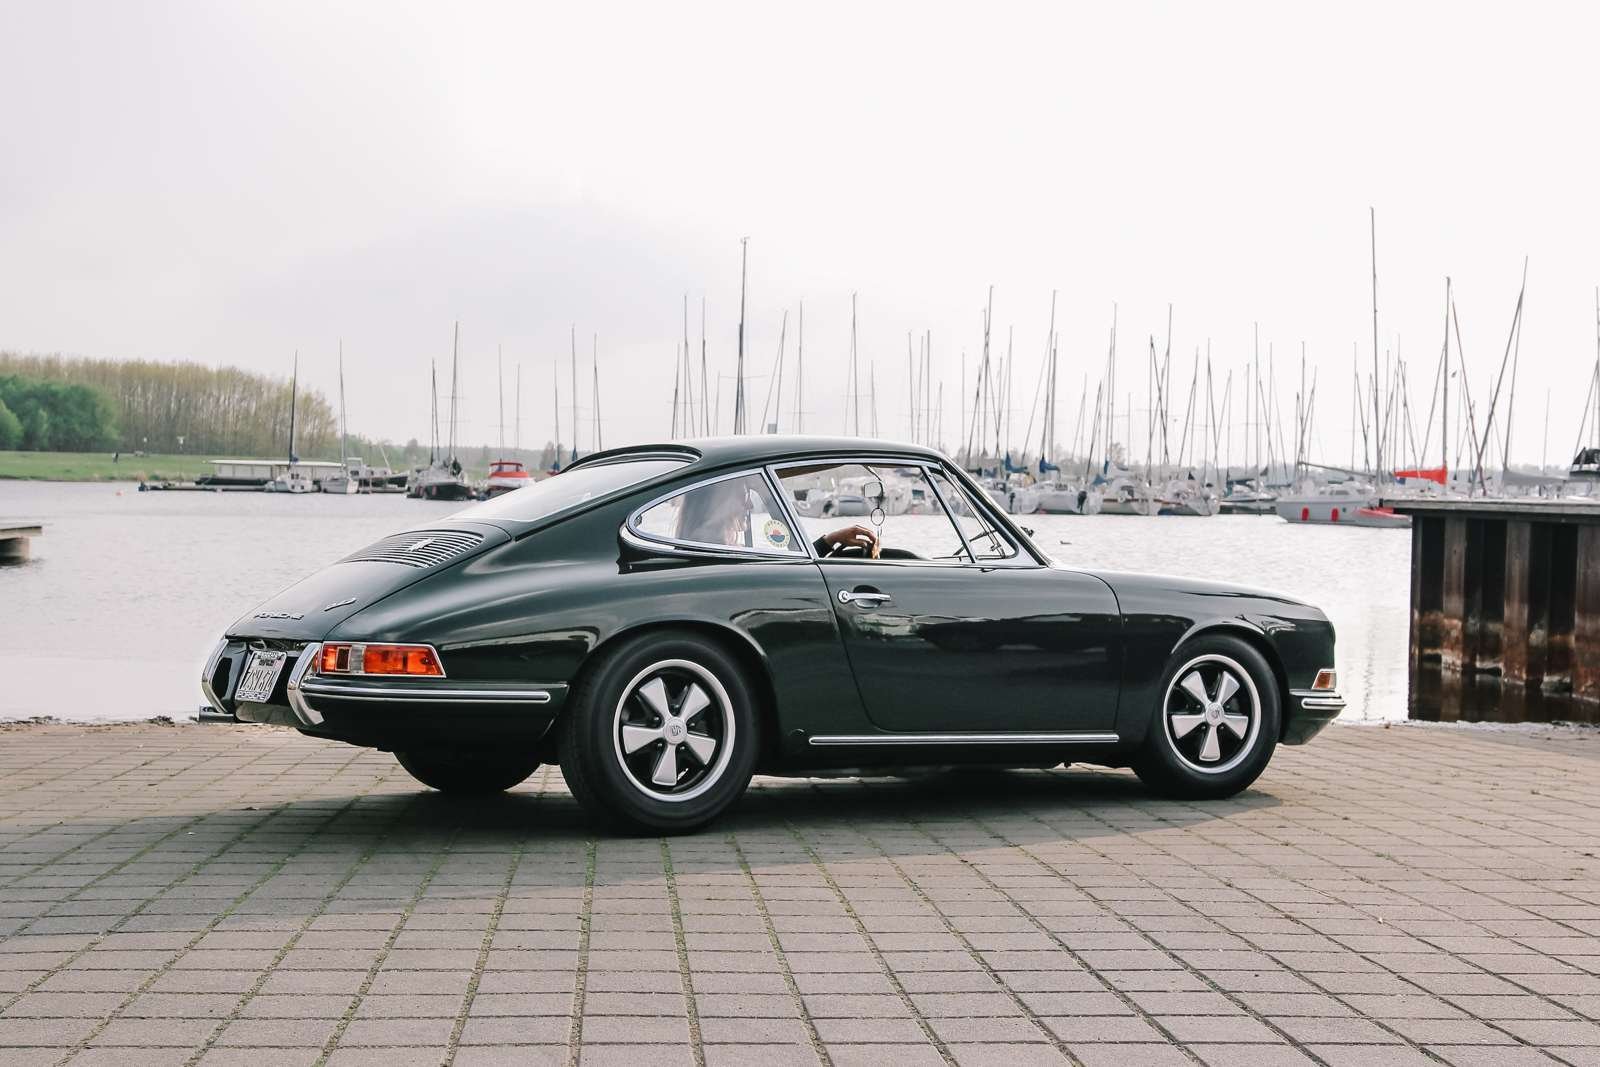 The Good Son Always Returns Home: Pille And His Porsche 912 